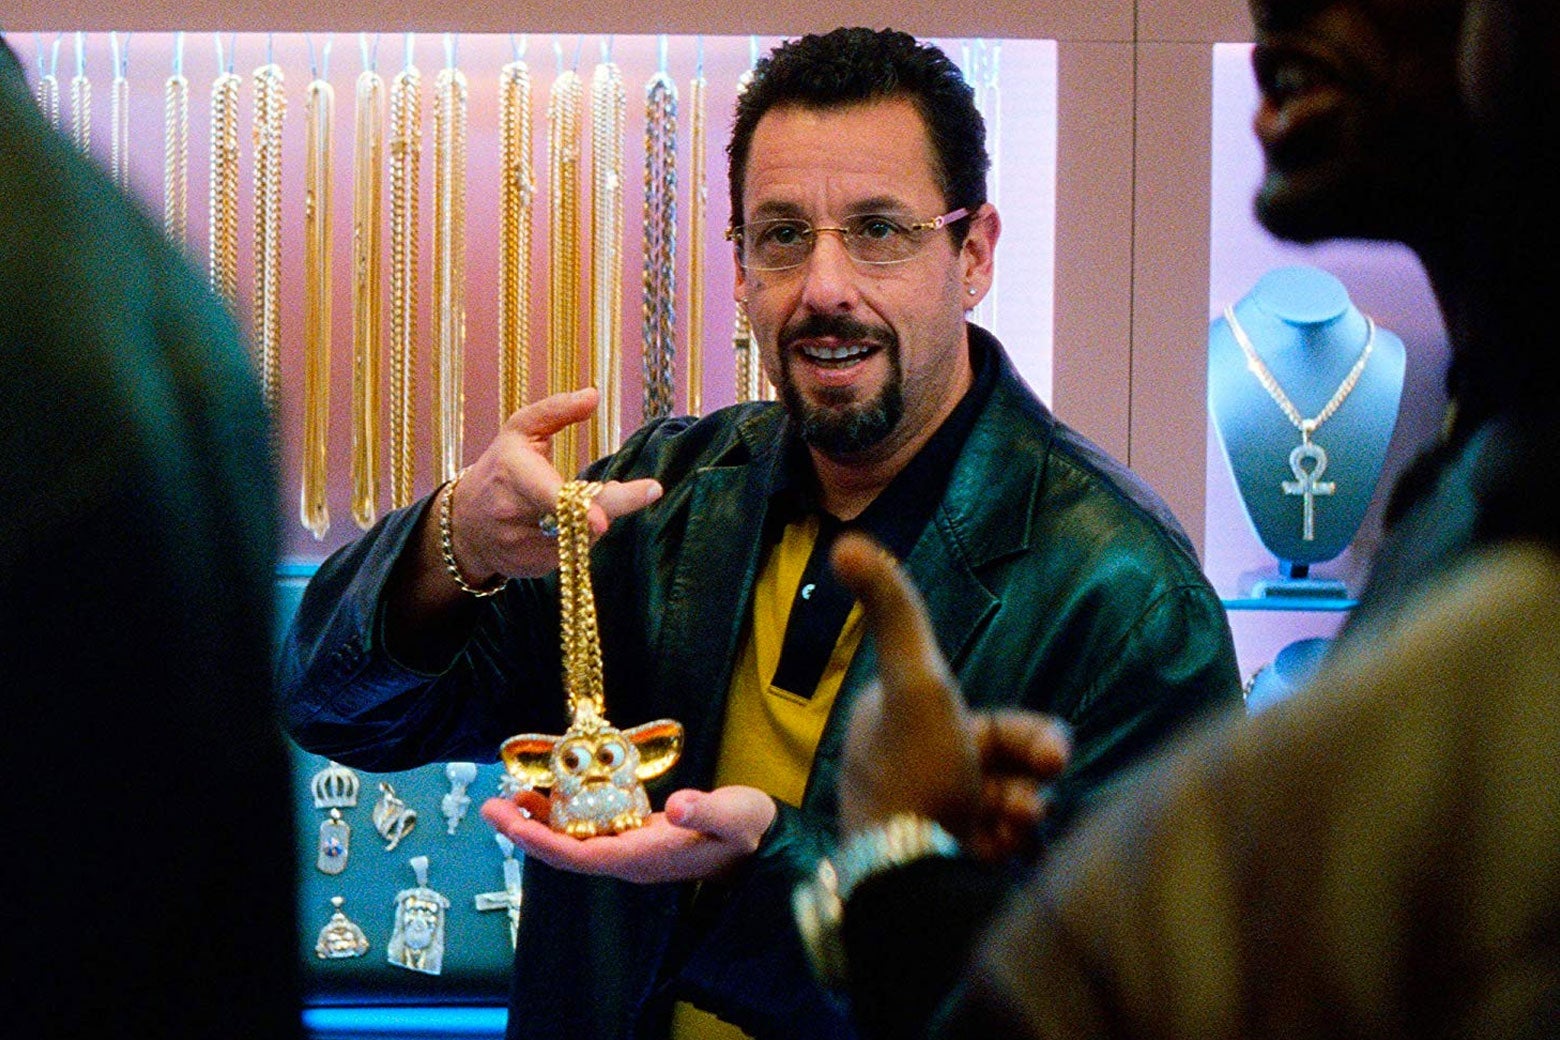 Adam Sandler's Howard holds up a very blinged-out Furby made of gold.